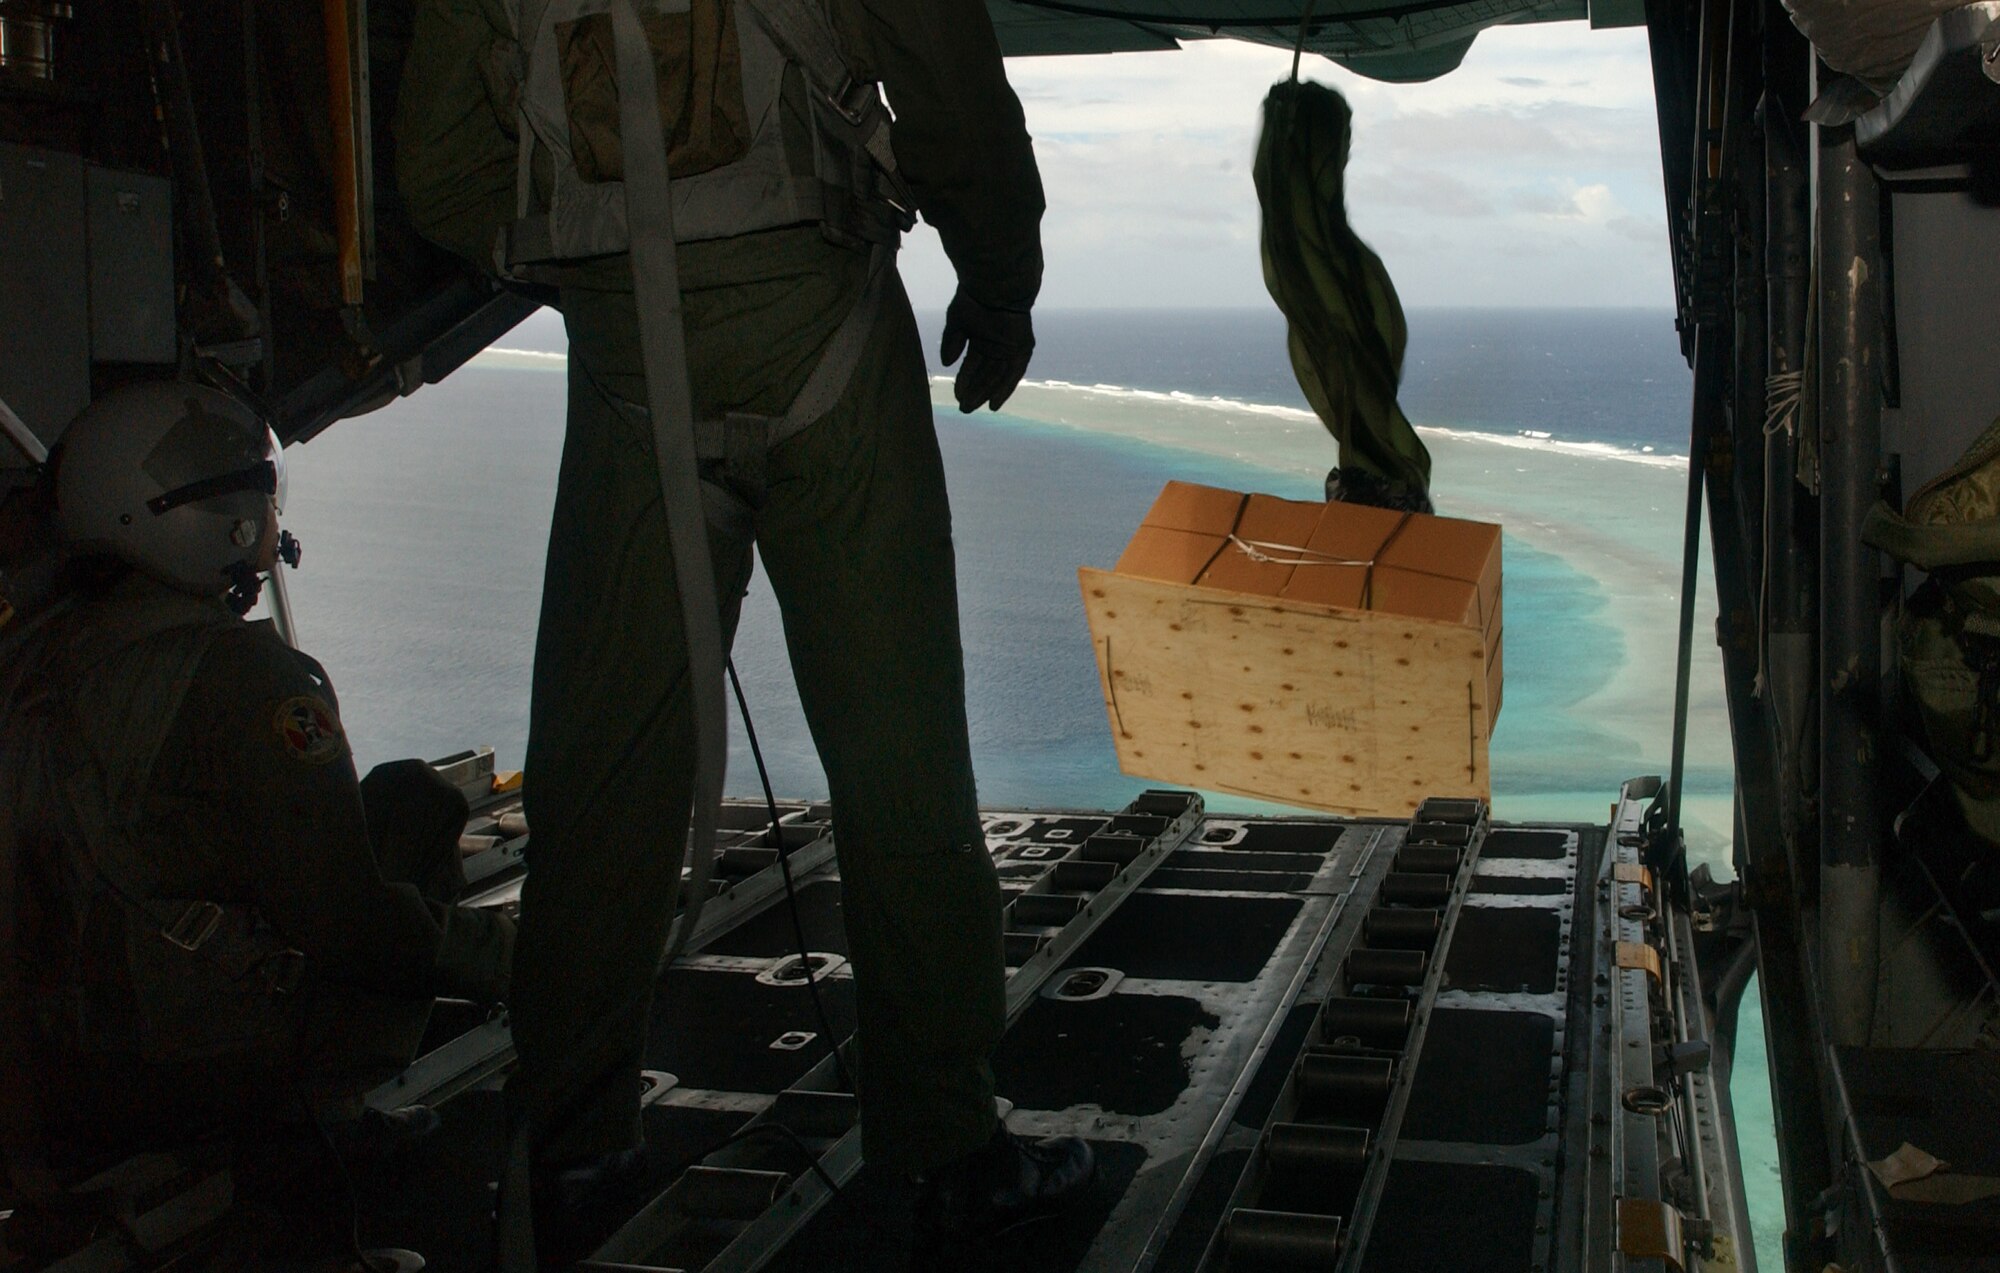 In support of Operation Christmas Drop, three C-130 Hercules flew over islands in the Western Pacific and Micronesia area Dec. 14 through 18 to deliver pallets containing several pounds of toys, holiday decorations and other donated items to help spread the holiday spirit. (U.S. Air Force photo/Senior Airman Brian Kimball)